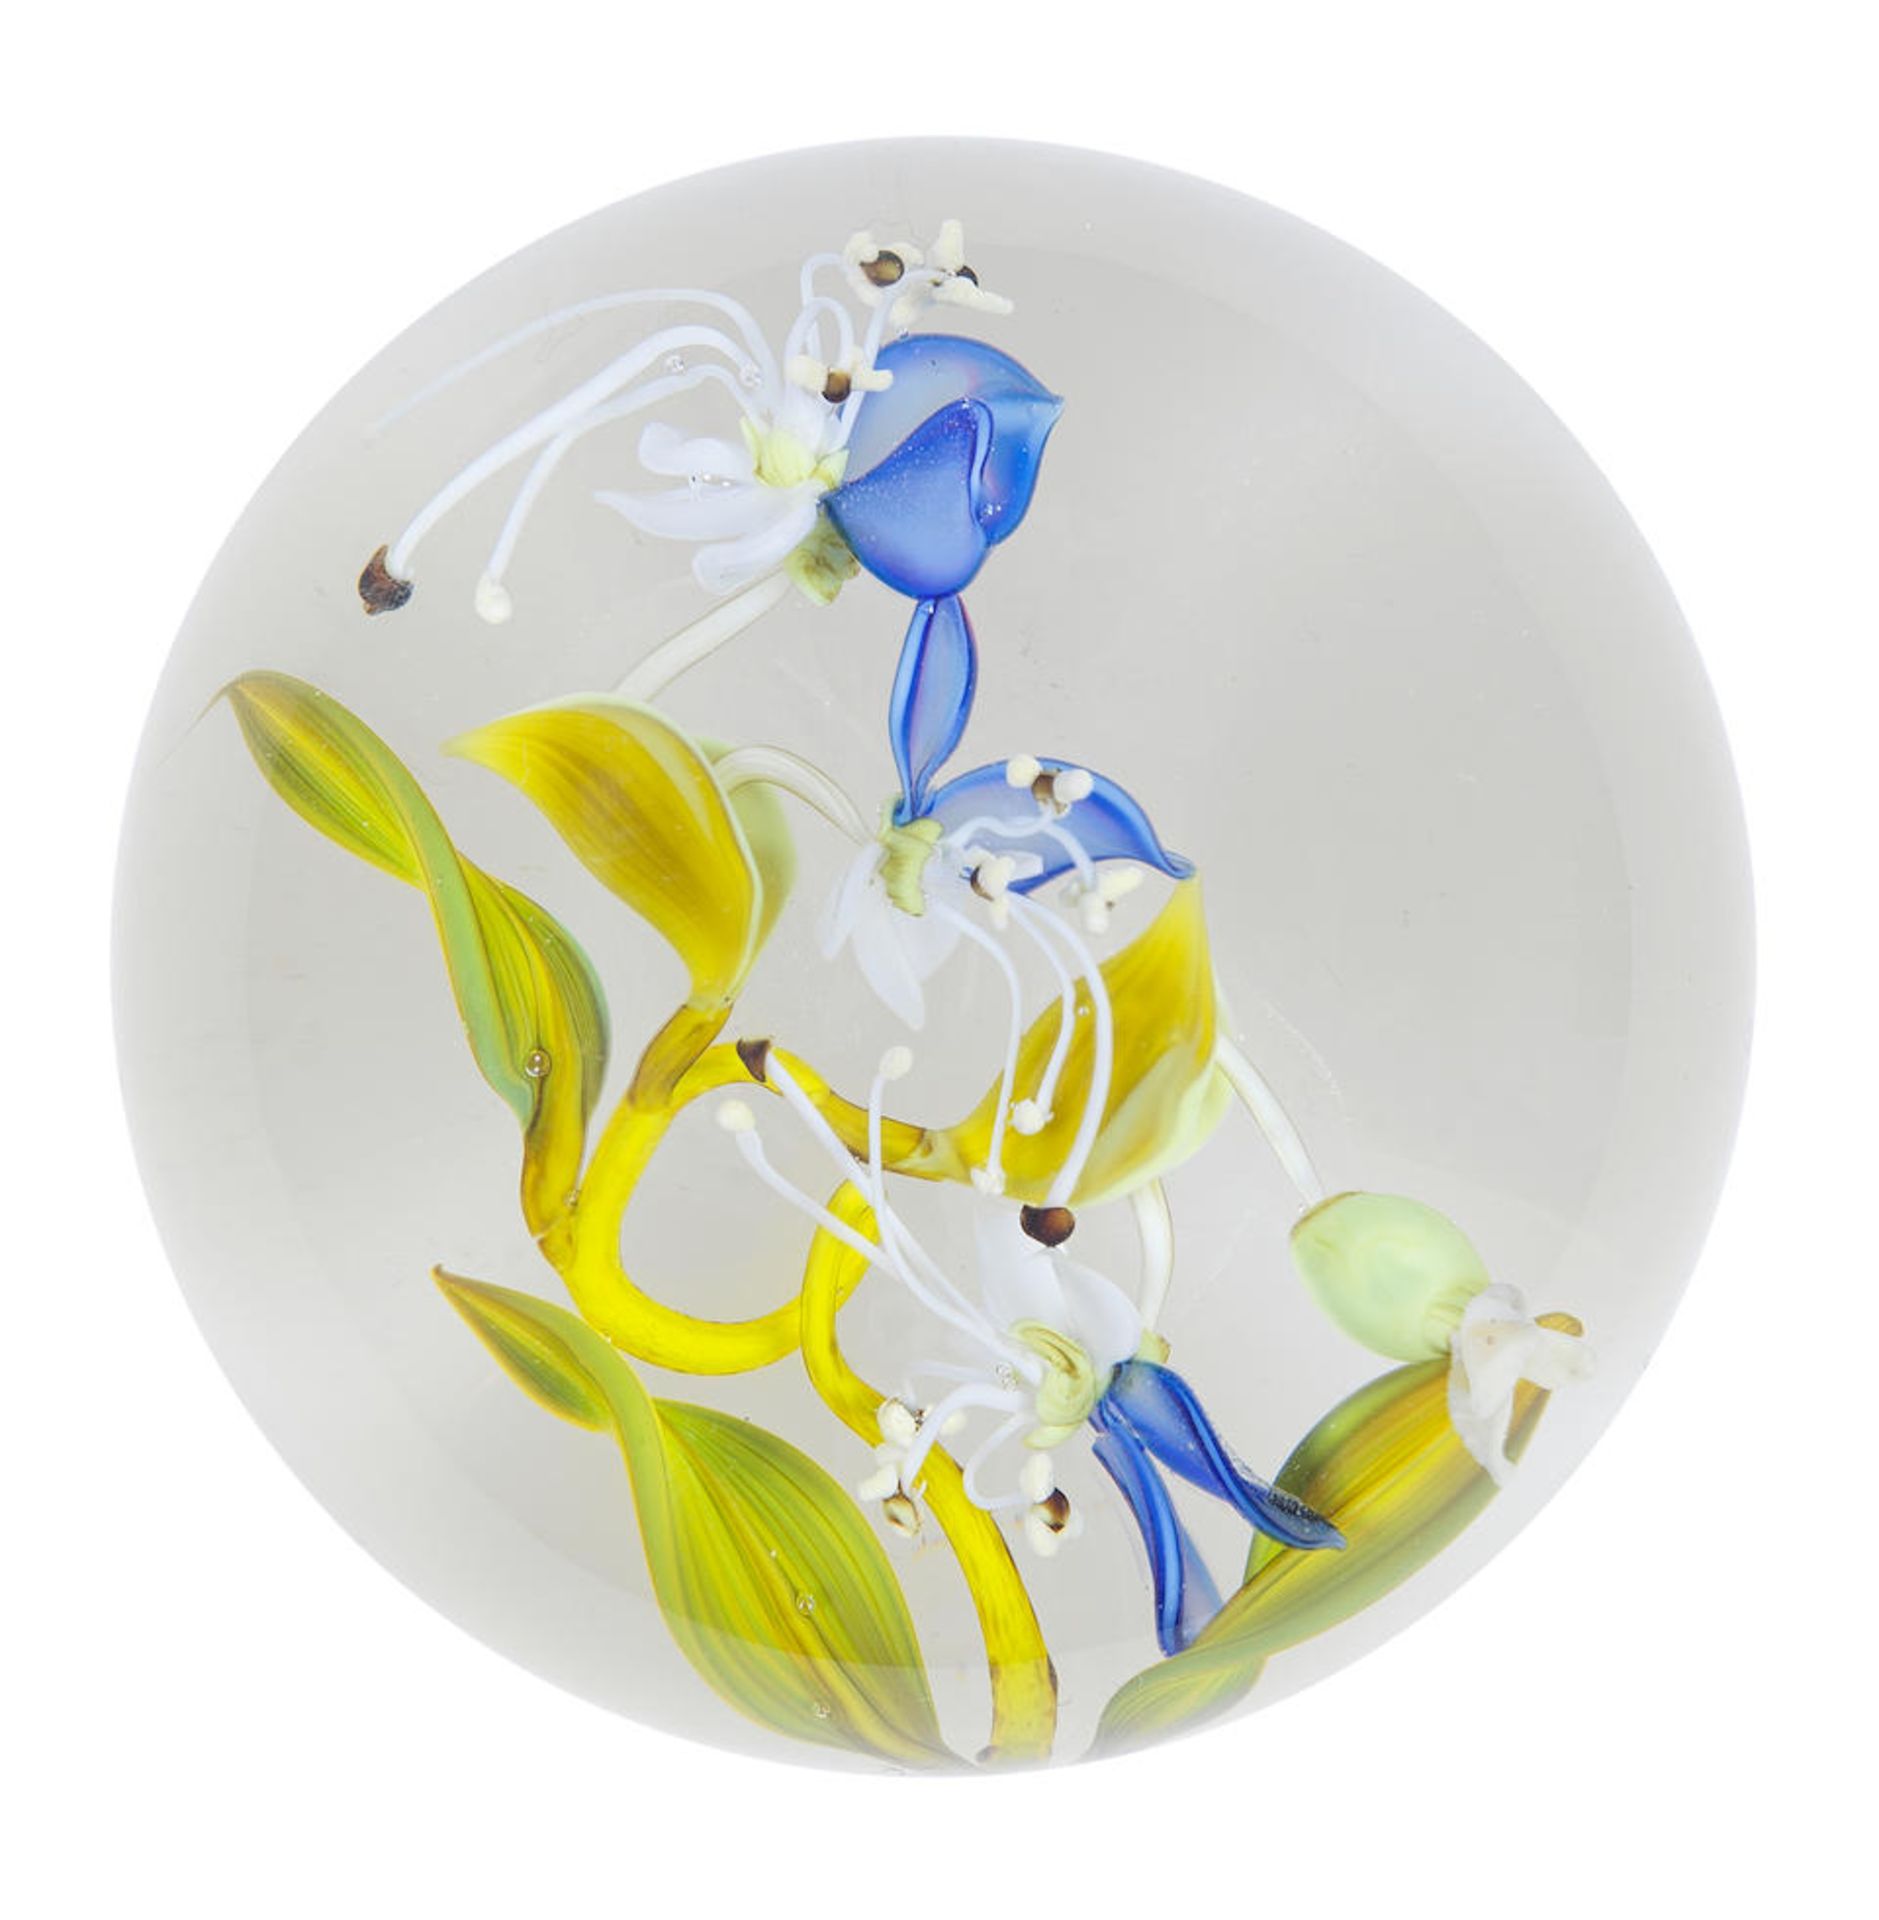 A Paul Stankard experimental Asiatic dayflower botanical magnum paperweight, dated 1994